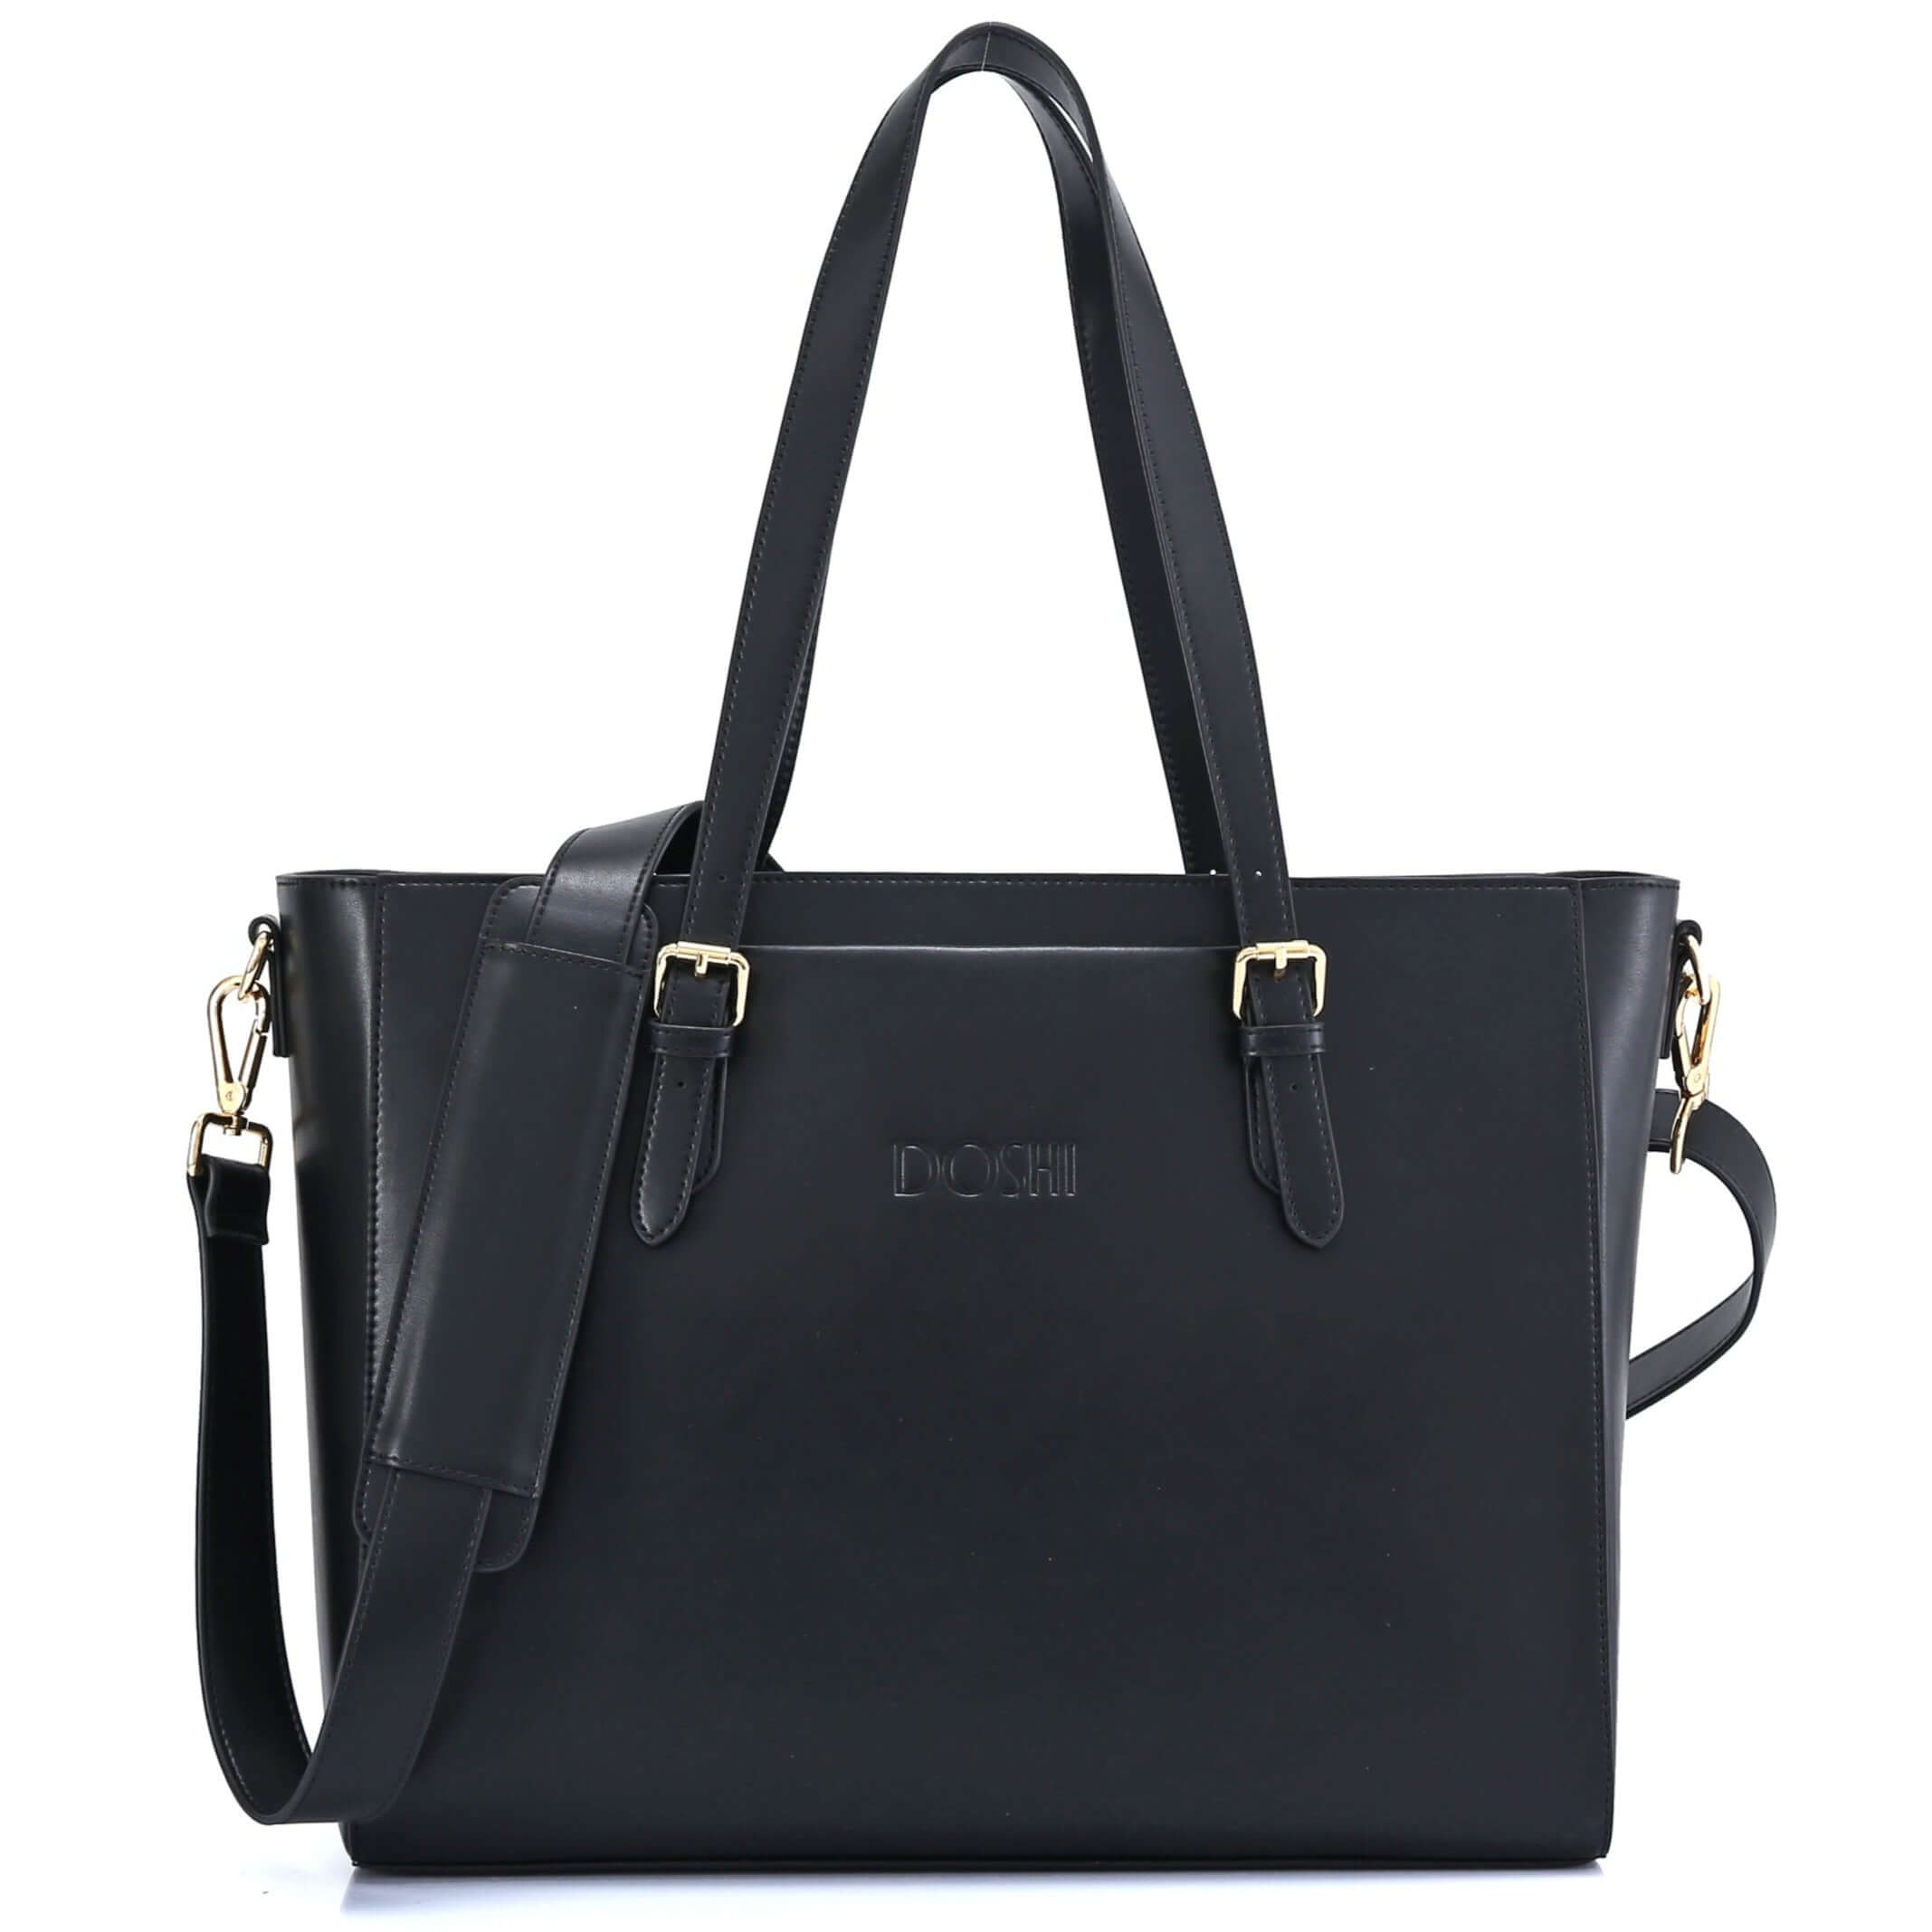 Doshi Totes for All Occasions | Doshi Shop